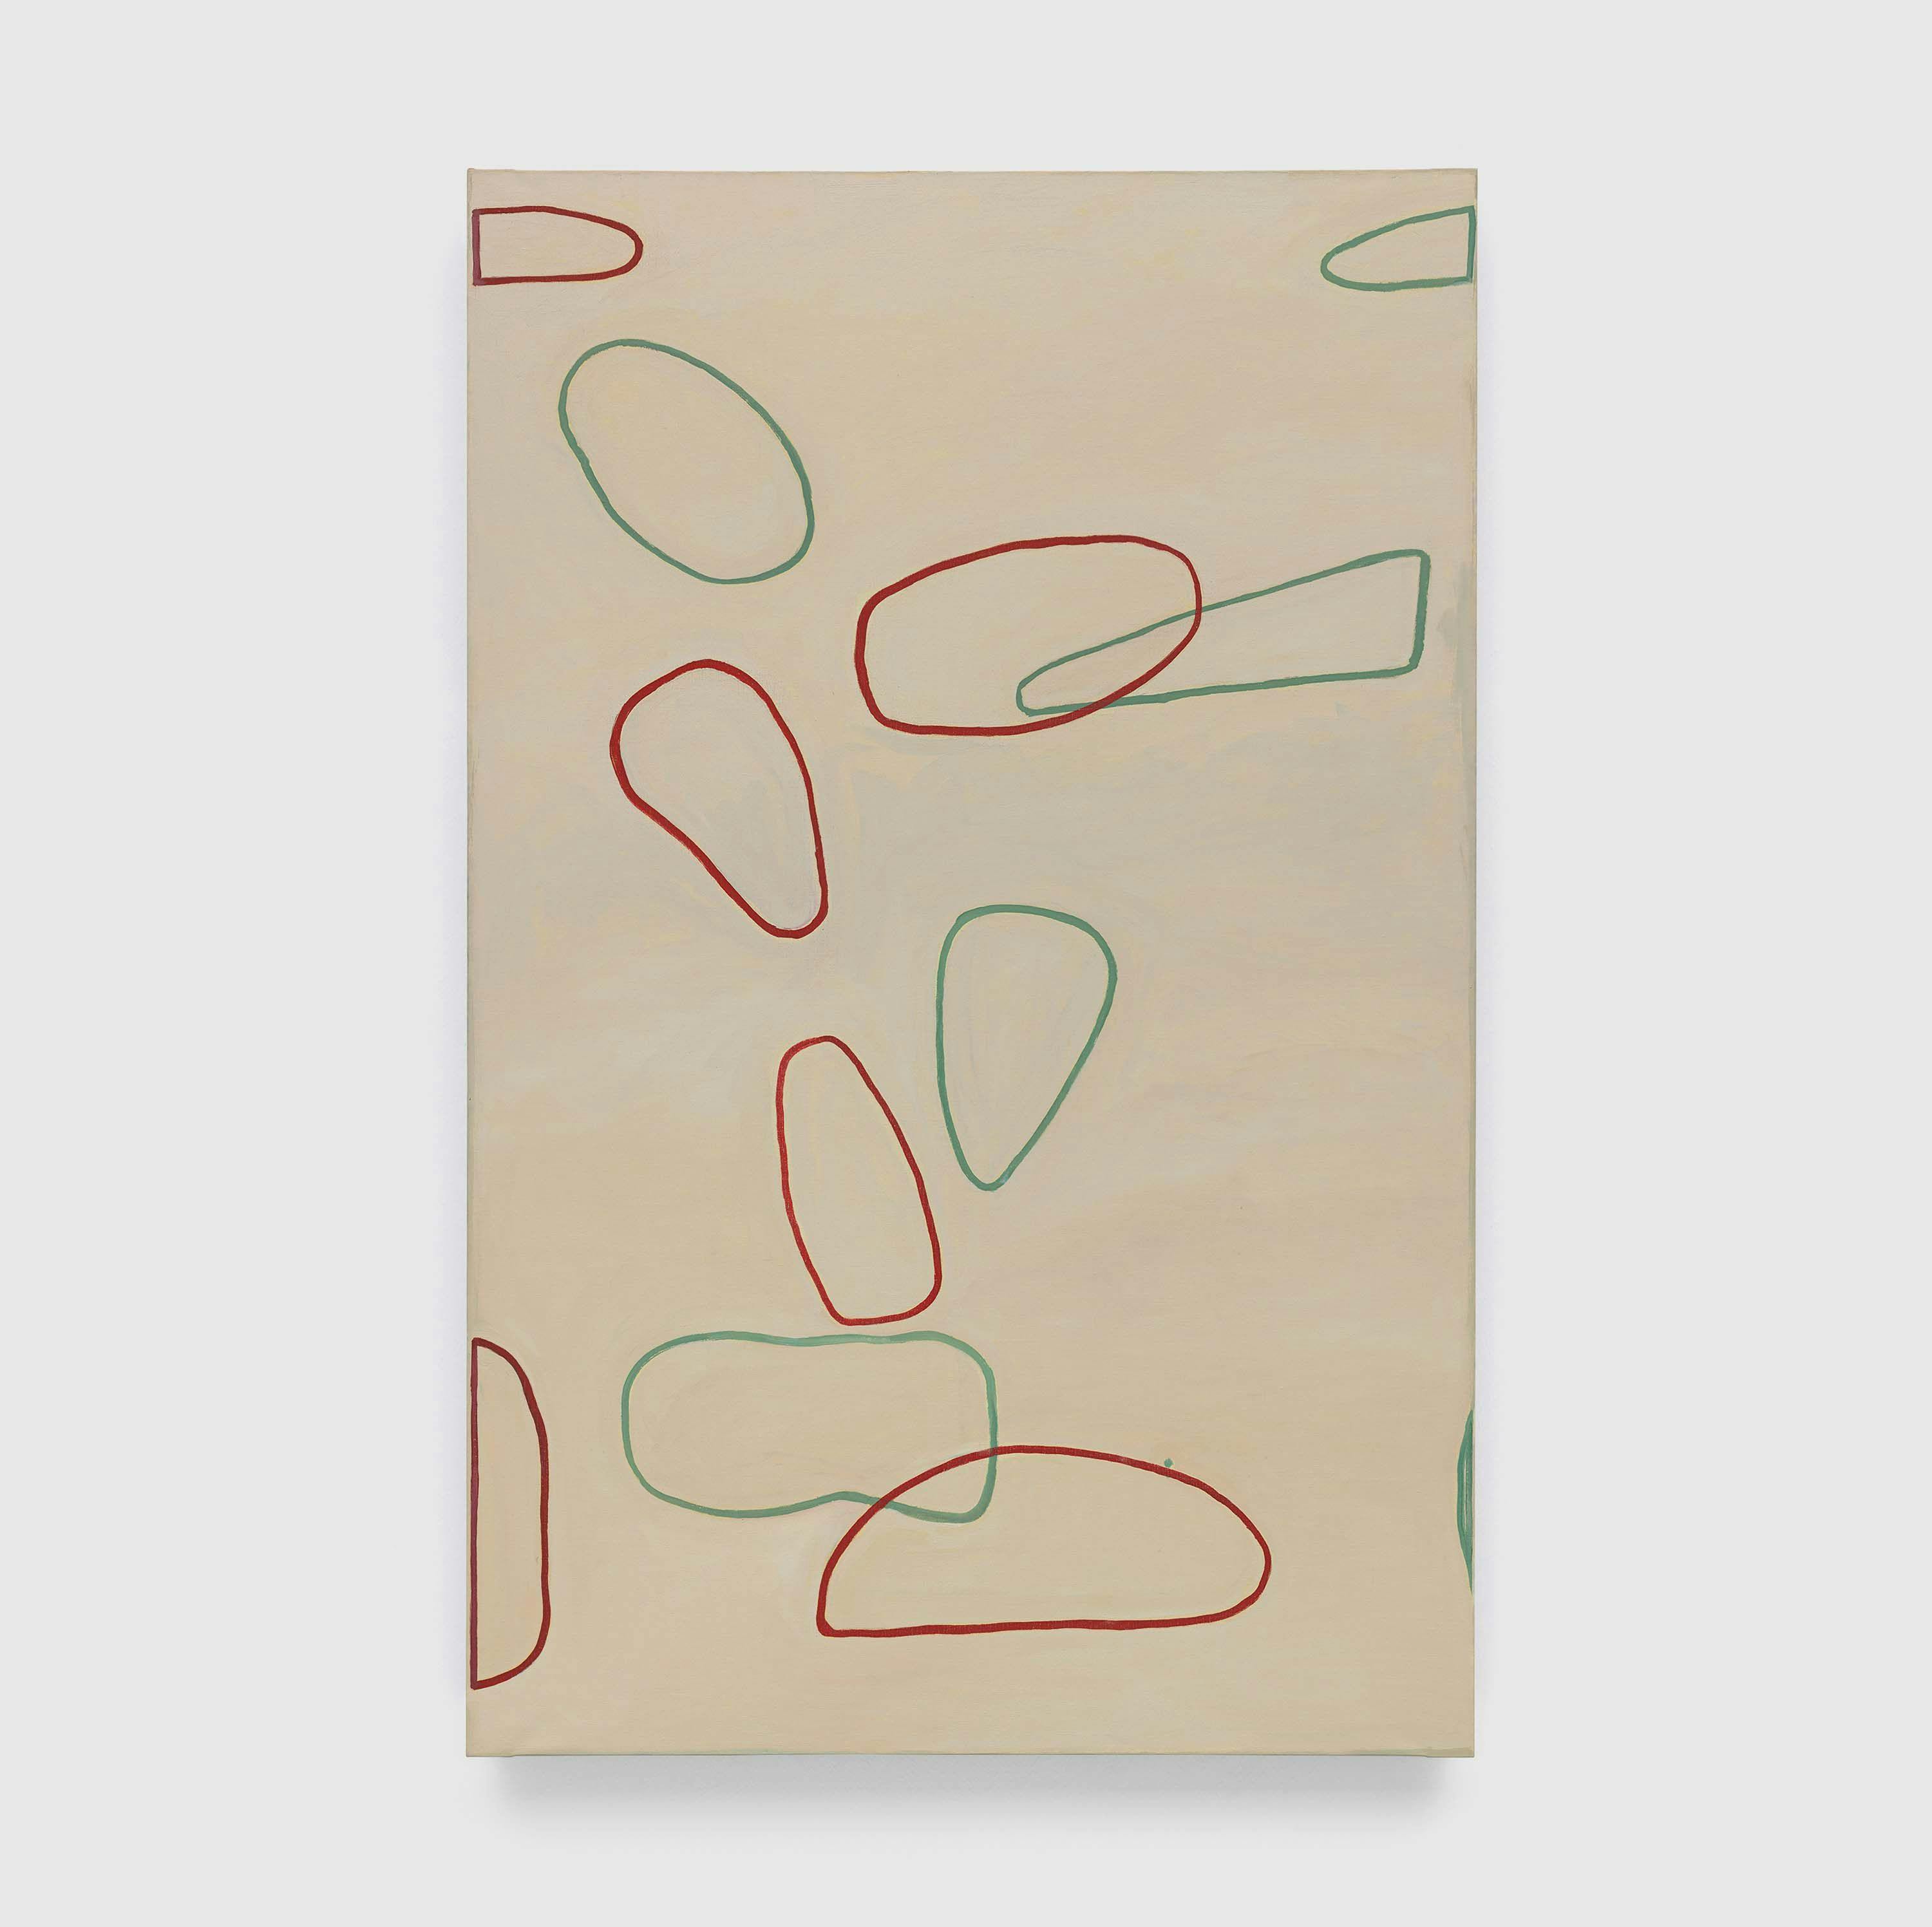 A painting by Raoul De Keyser, titled Come on, play it again nr. 4, dated 2001.